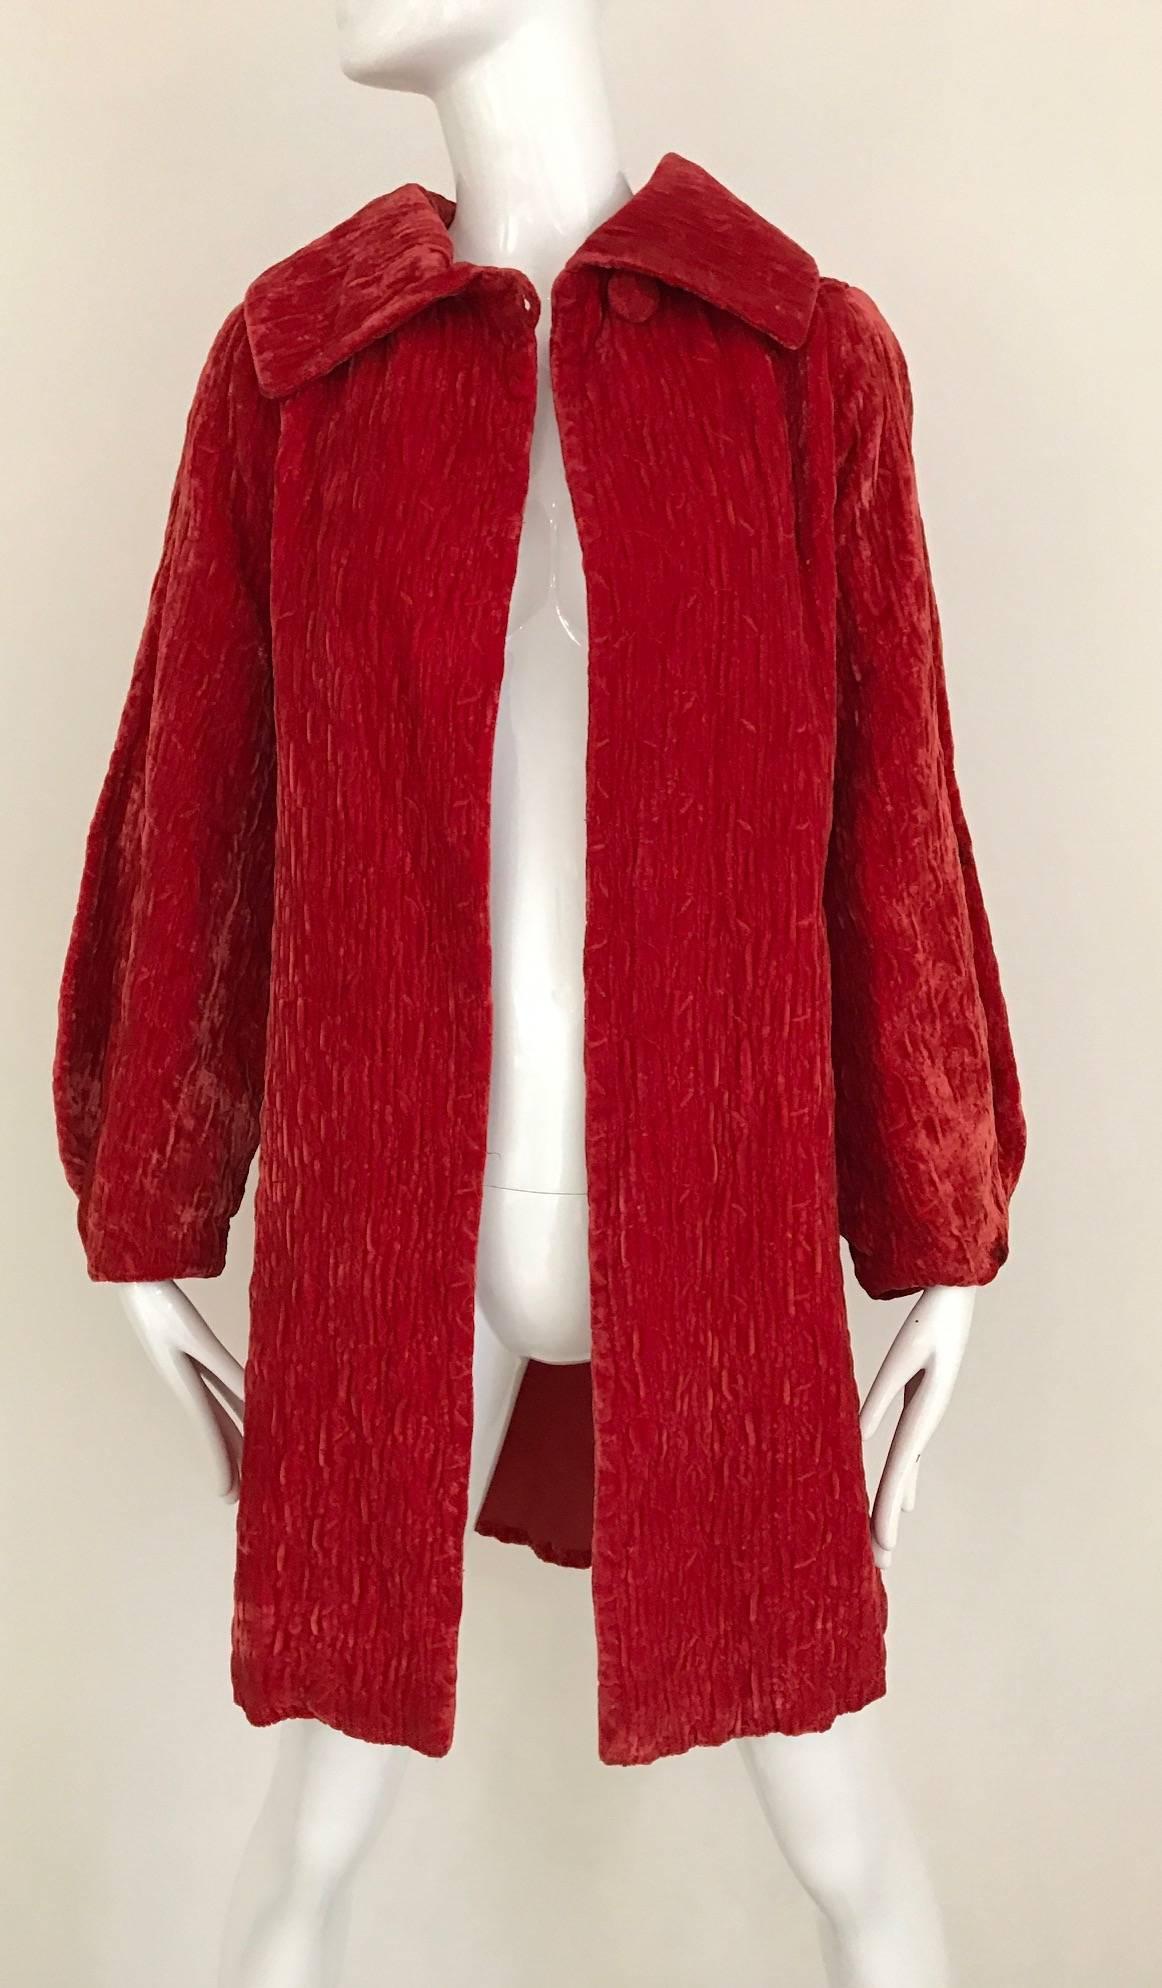 Vintage 40s Orange Red crushed velvet coat with large collar and dramatic sleeves. 
 Size: 6/8/ 10  MEDIUM
Bust:42 inch  / Waist: 44 inch/ Hip 46 inch/ Length: 33 inch/  Sleeve 21 inch